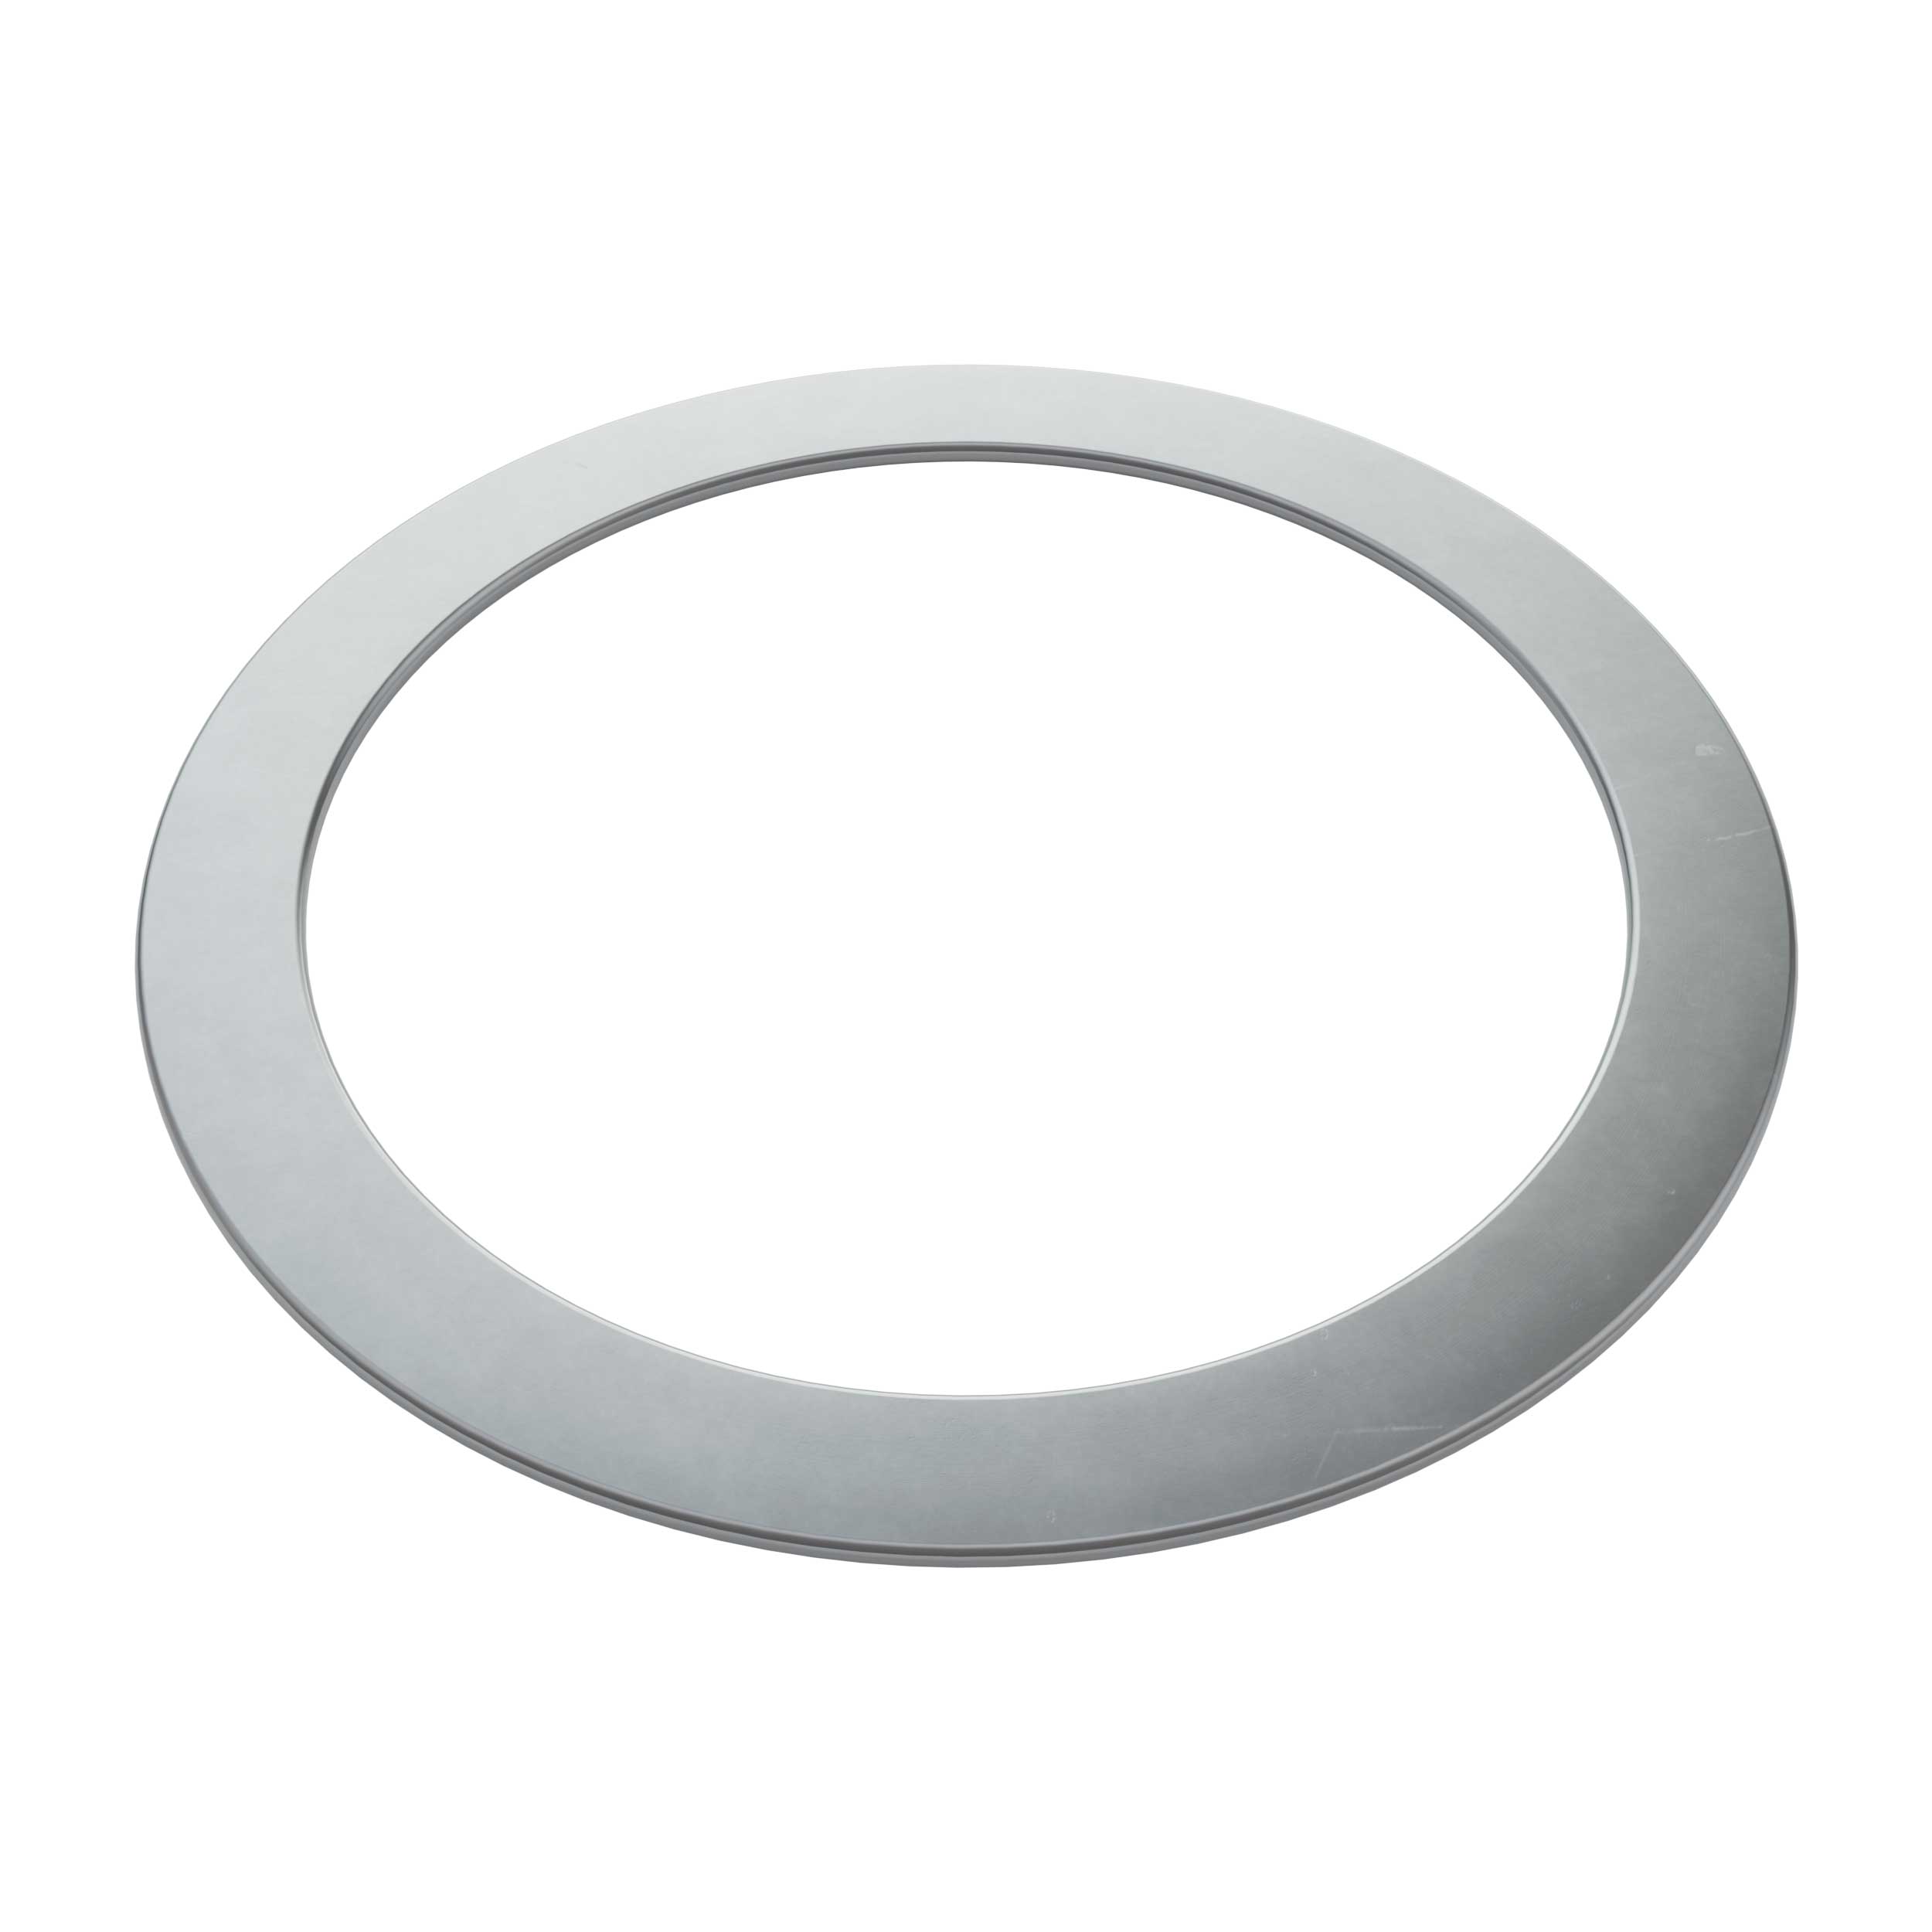 2807 Series Stainless Steel Shim (12mm ID x 15mm OD, 0.25mm Thickness) - 12  Pack